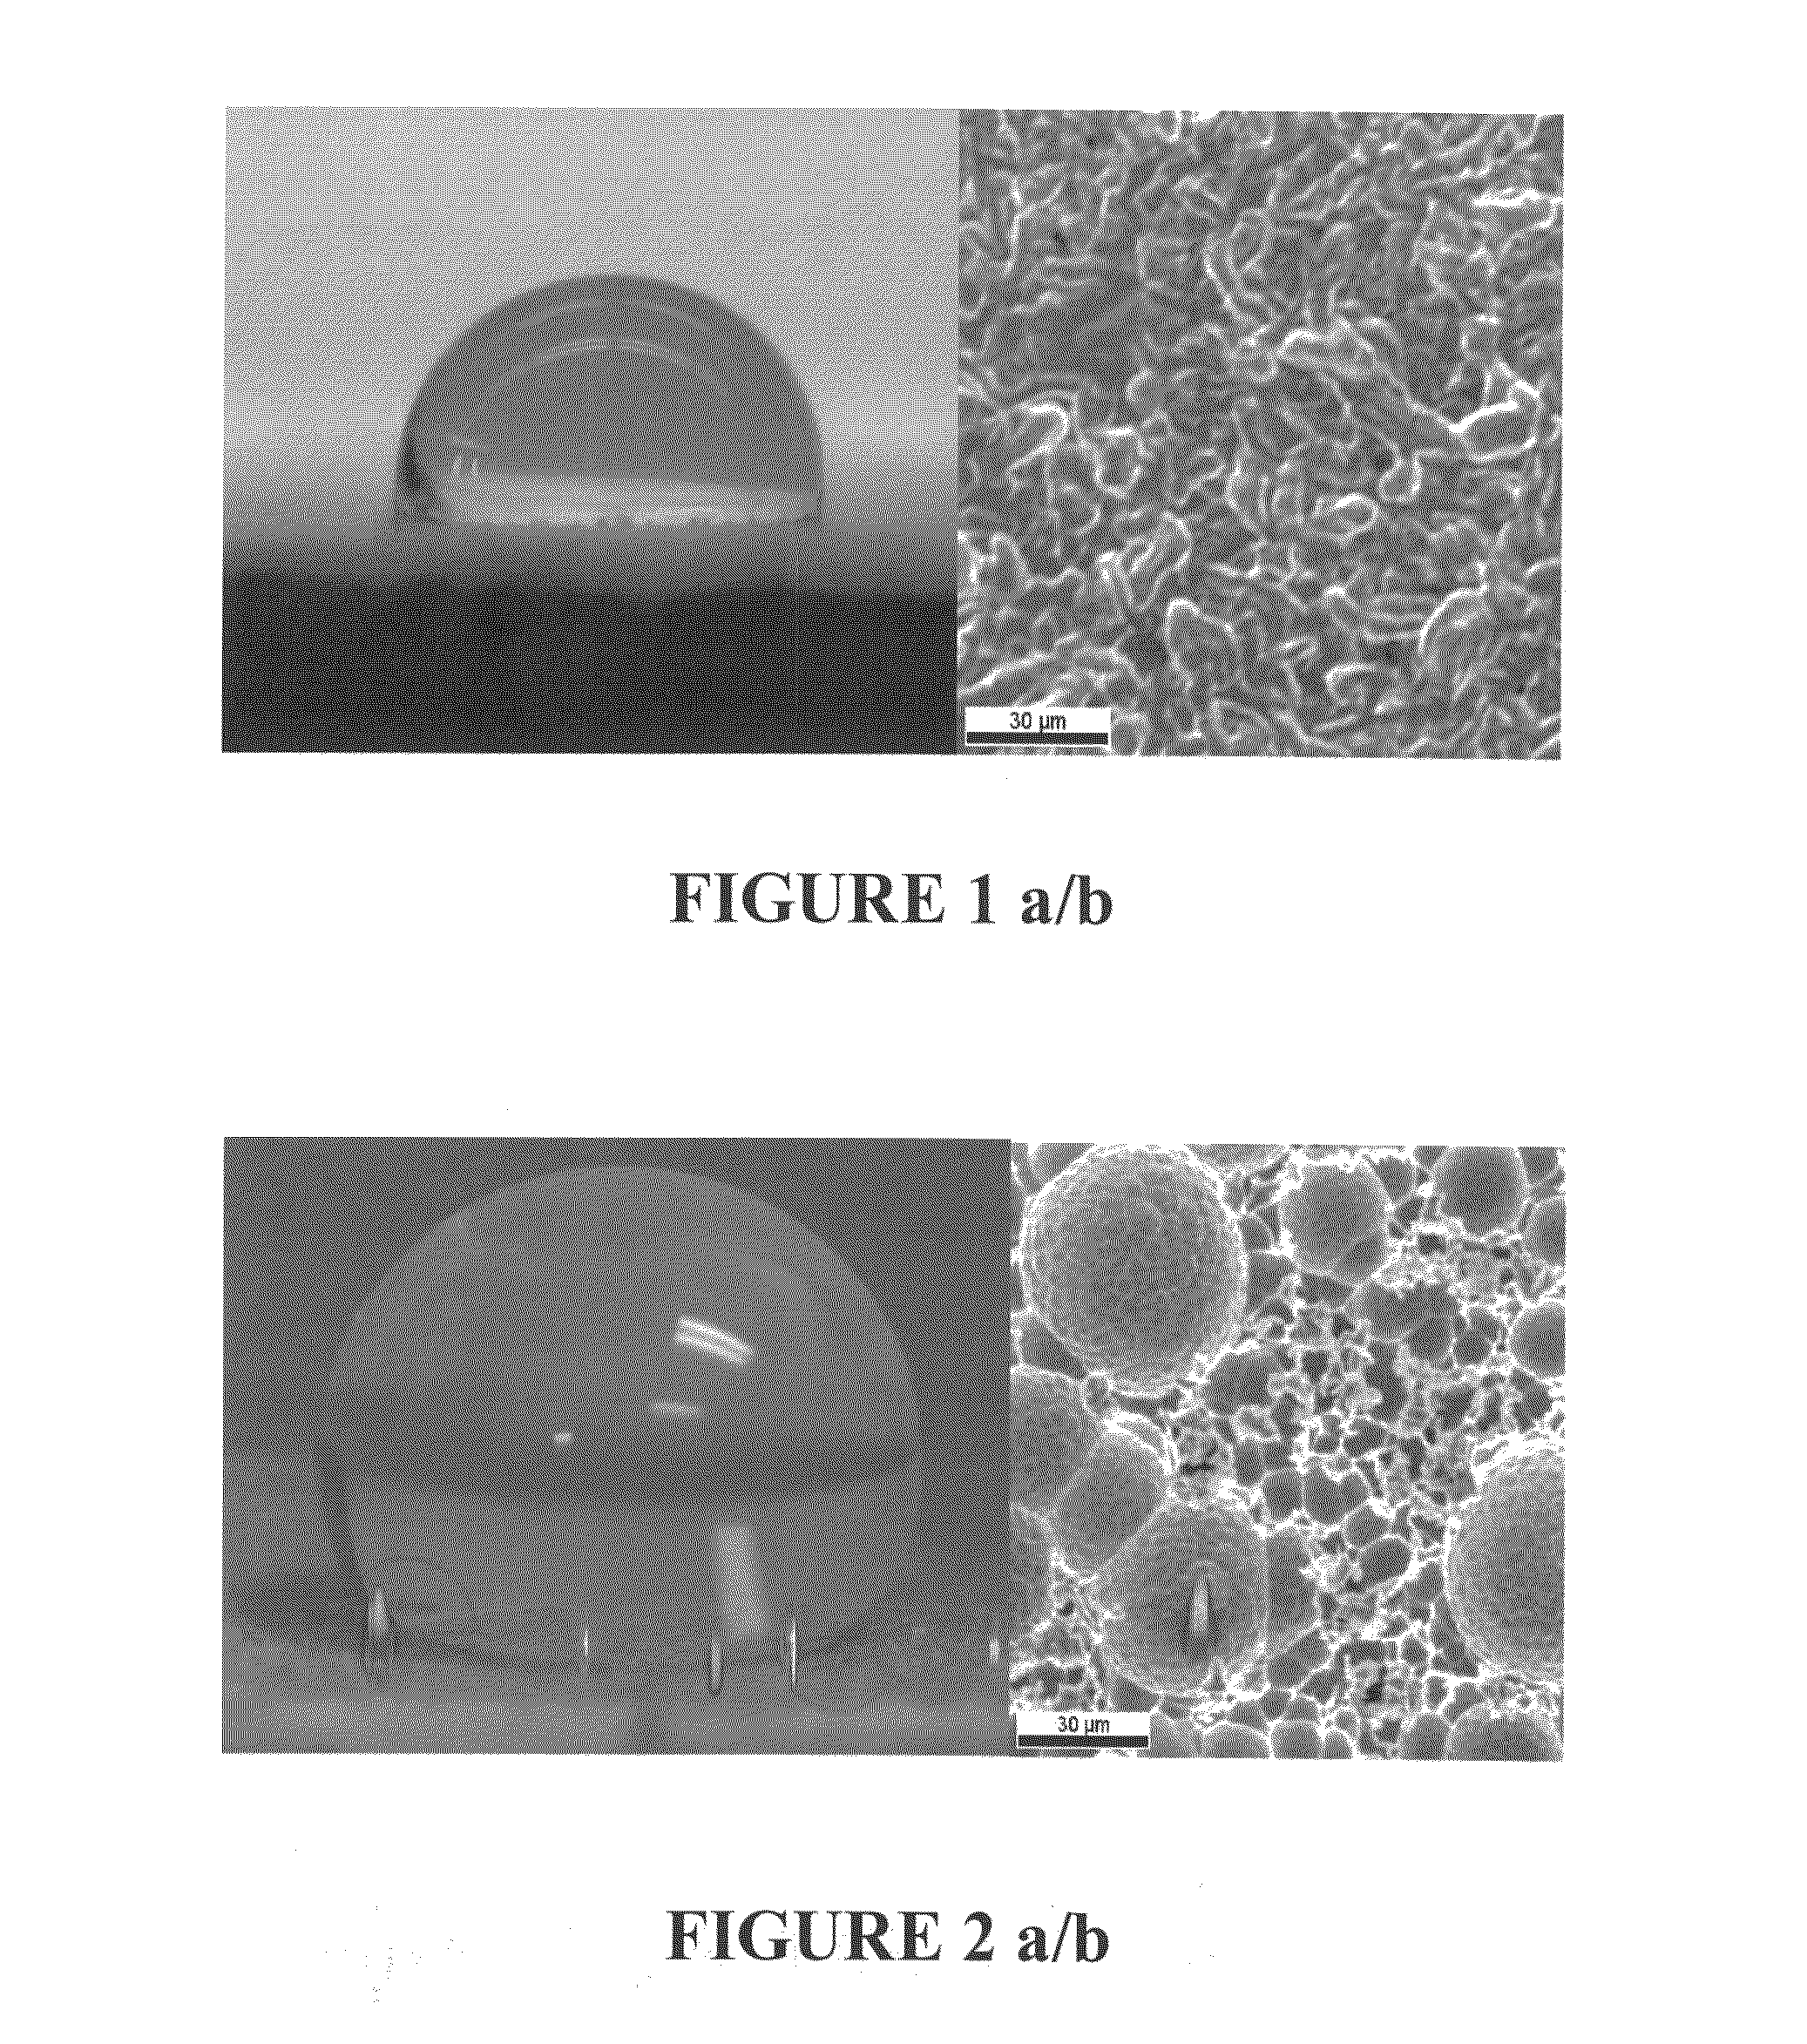 Metallic articles with hydrophobic surfaces